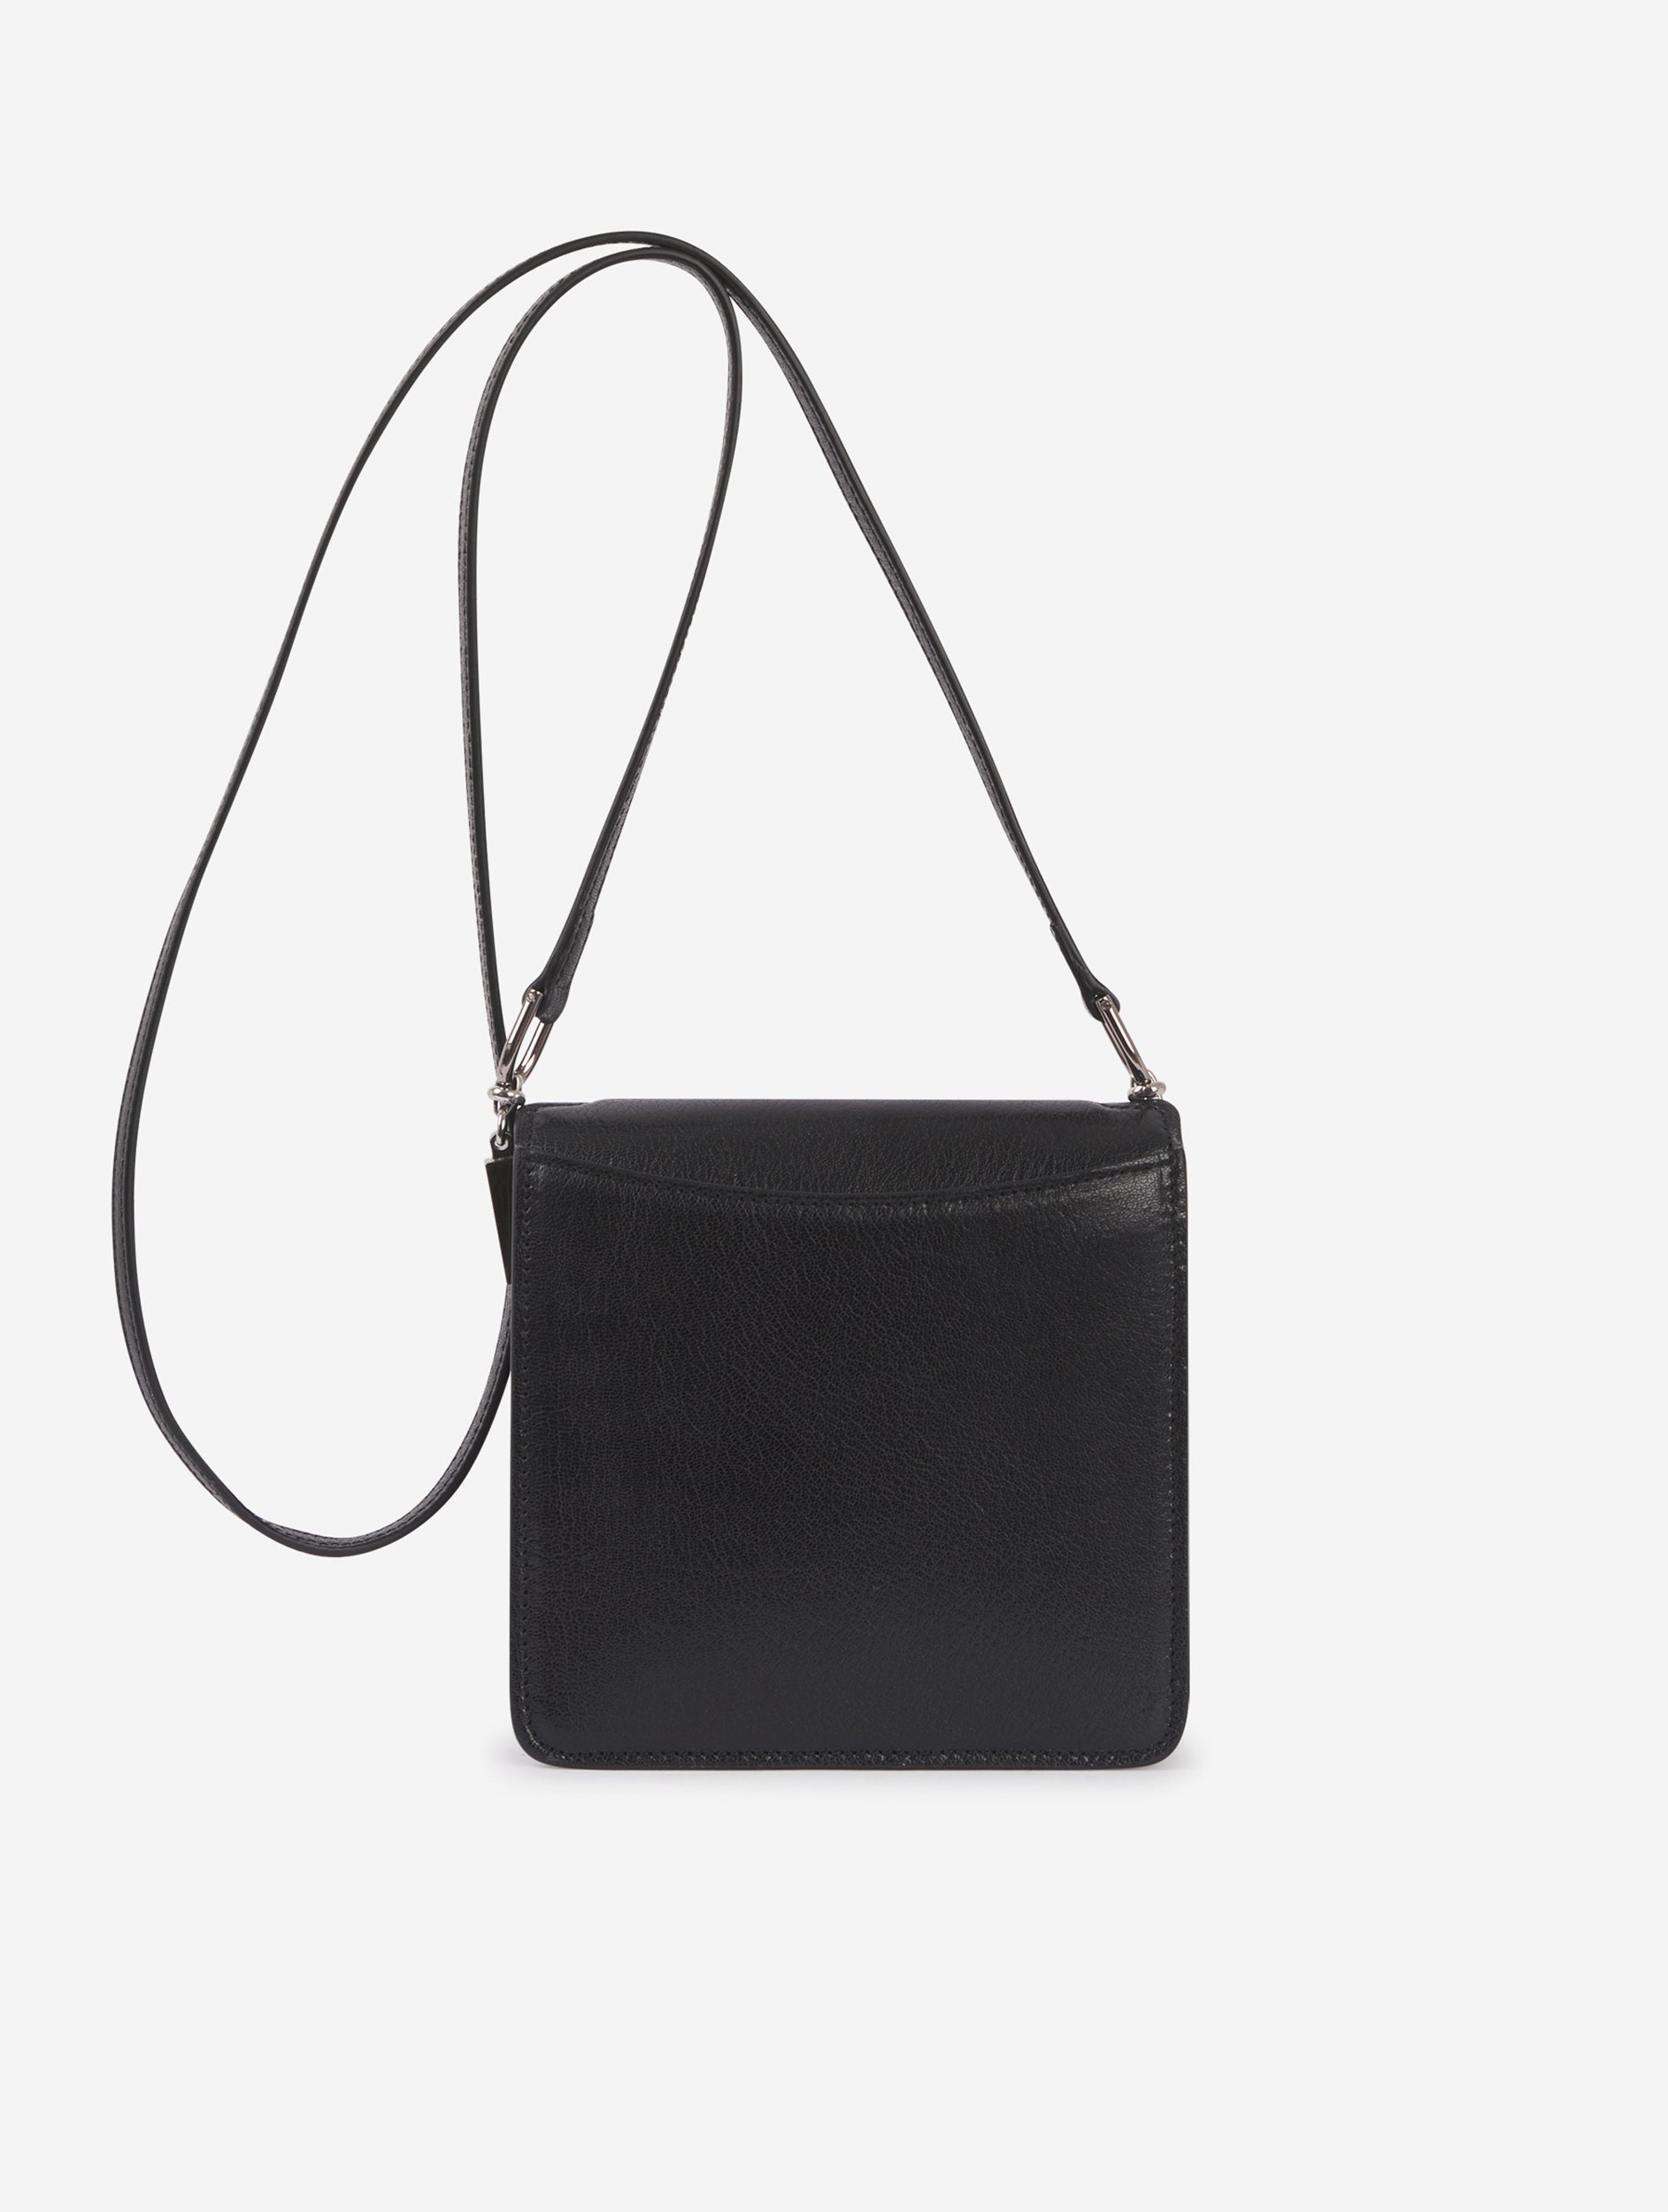 Small black leather Love Me bag